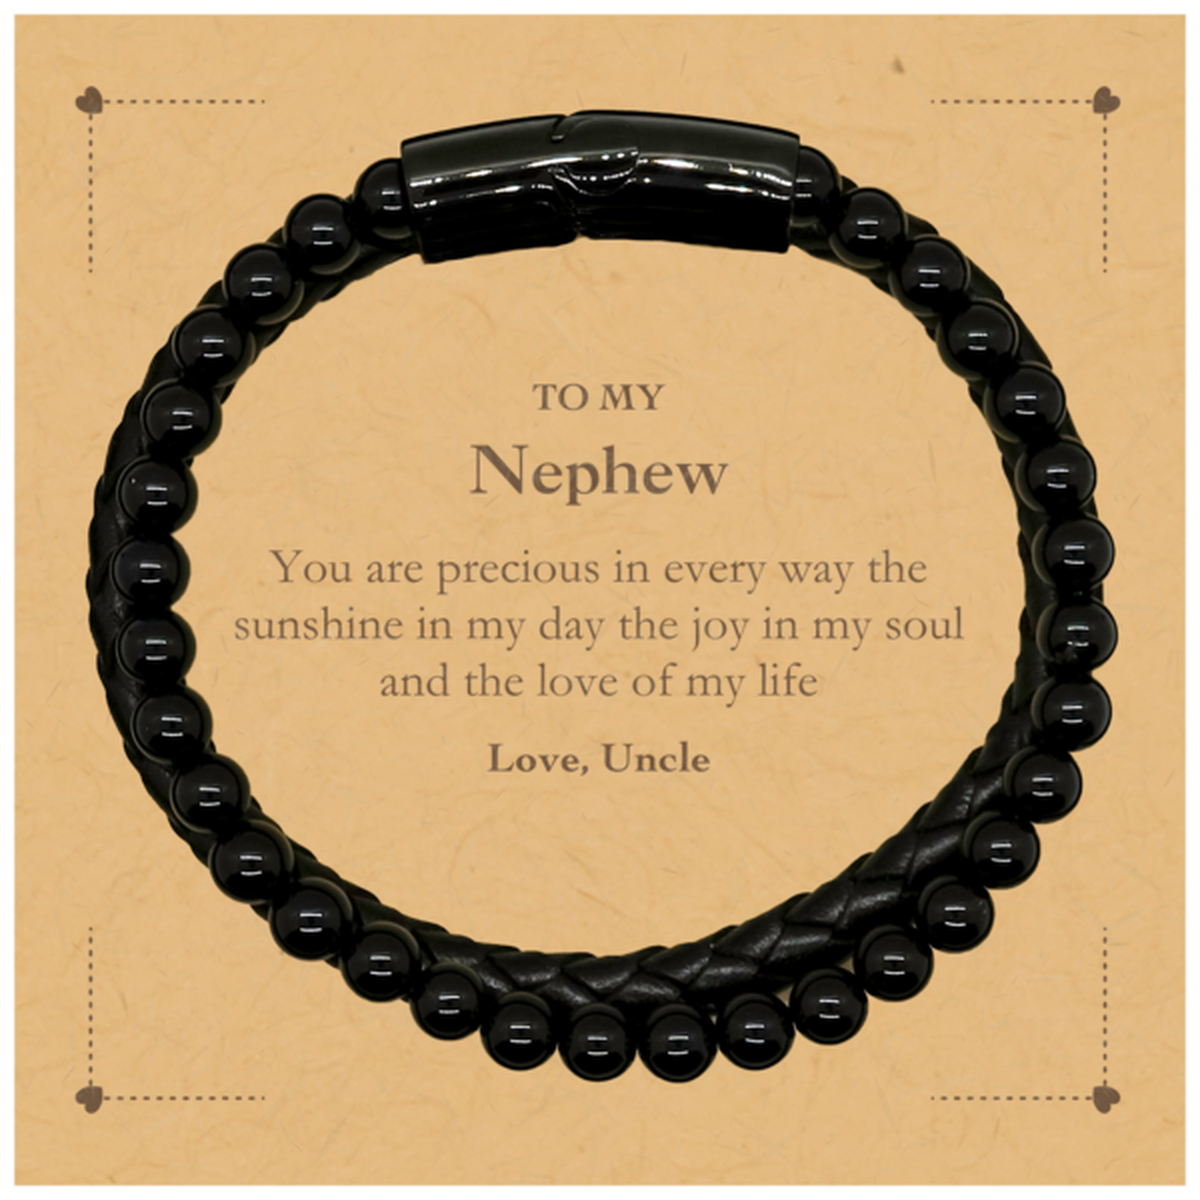 Graduation Gifts for Nephew Stone Leather Bracelets Present from Uncle, Christmas Nephew Birthday Gifts Nephew You are precious in every way the sunshine in my day. Love, Uncle